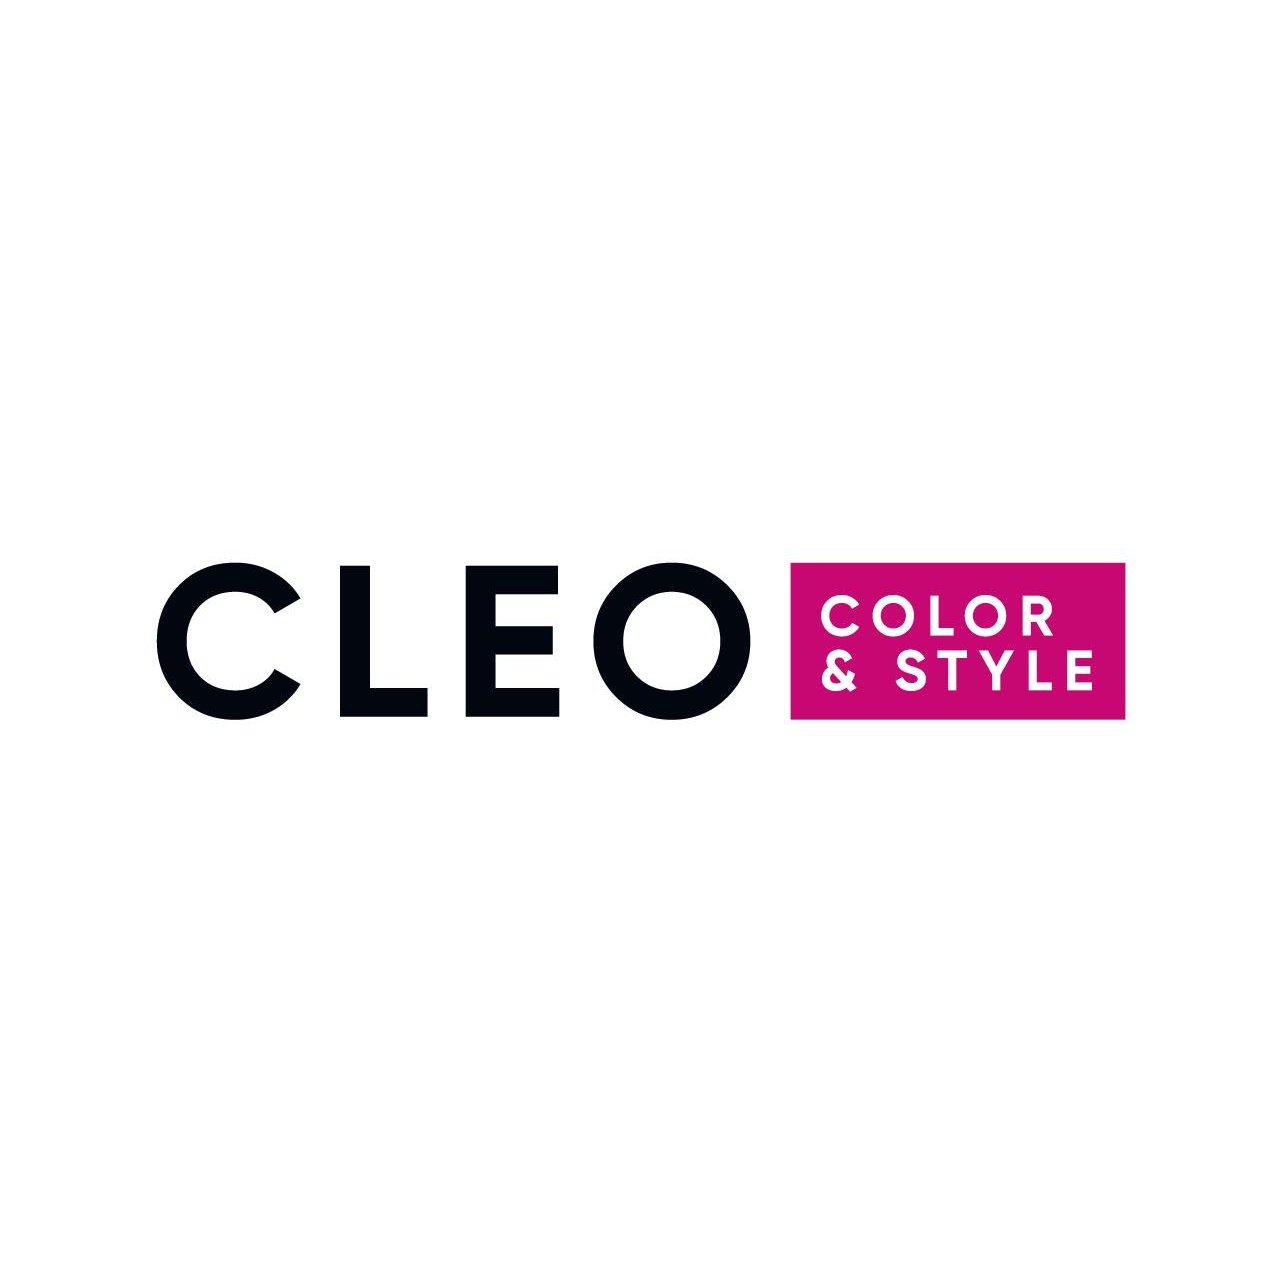 Cleo Color & Style  